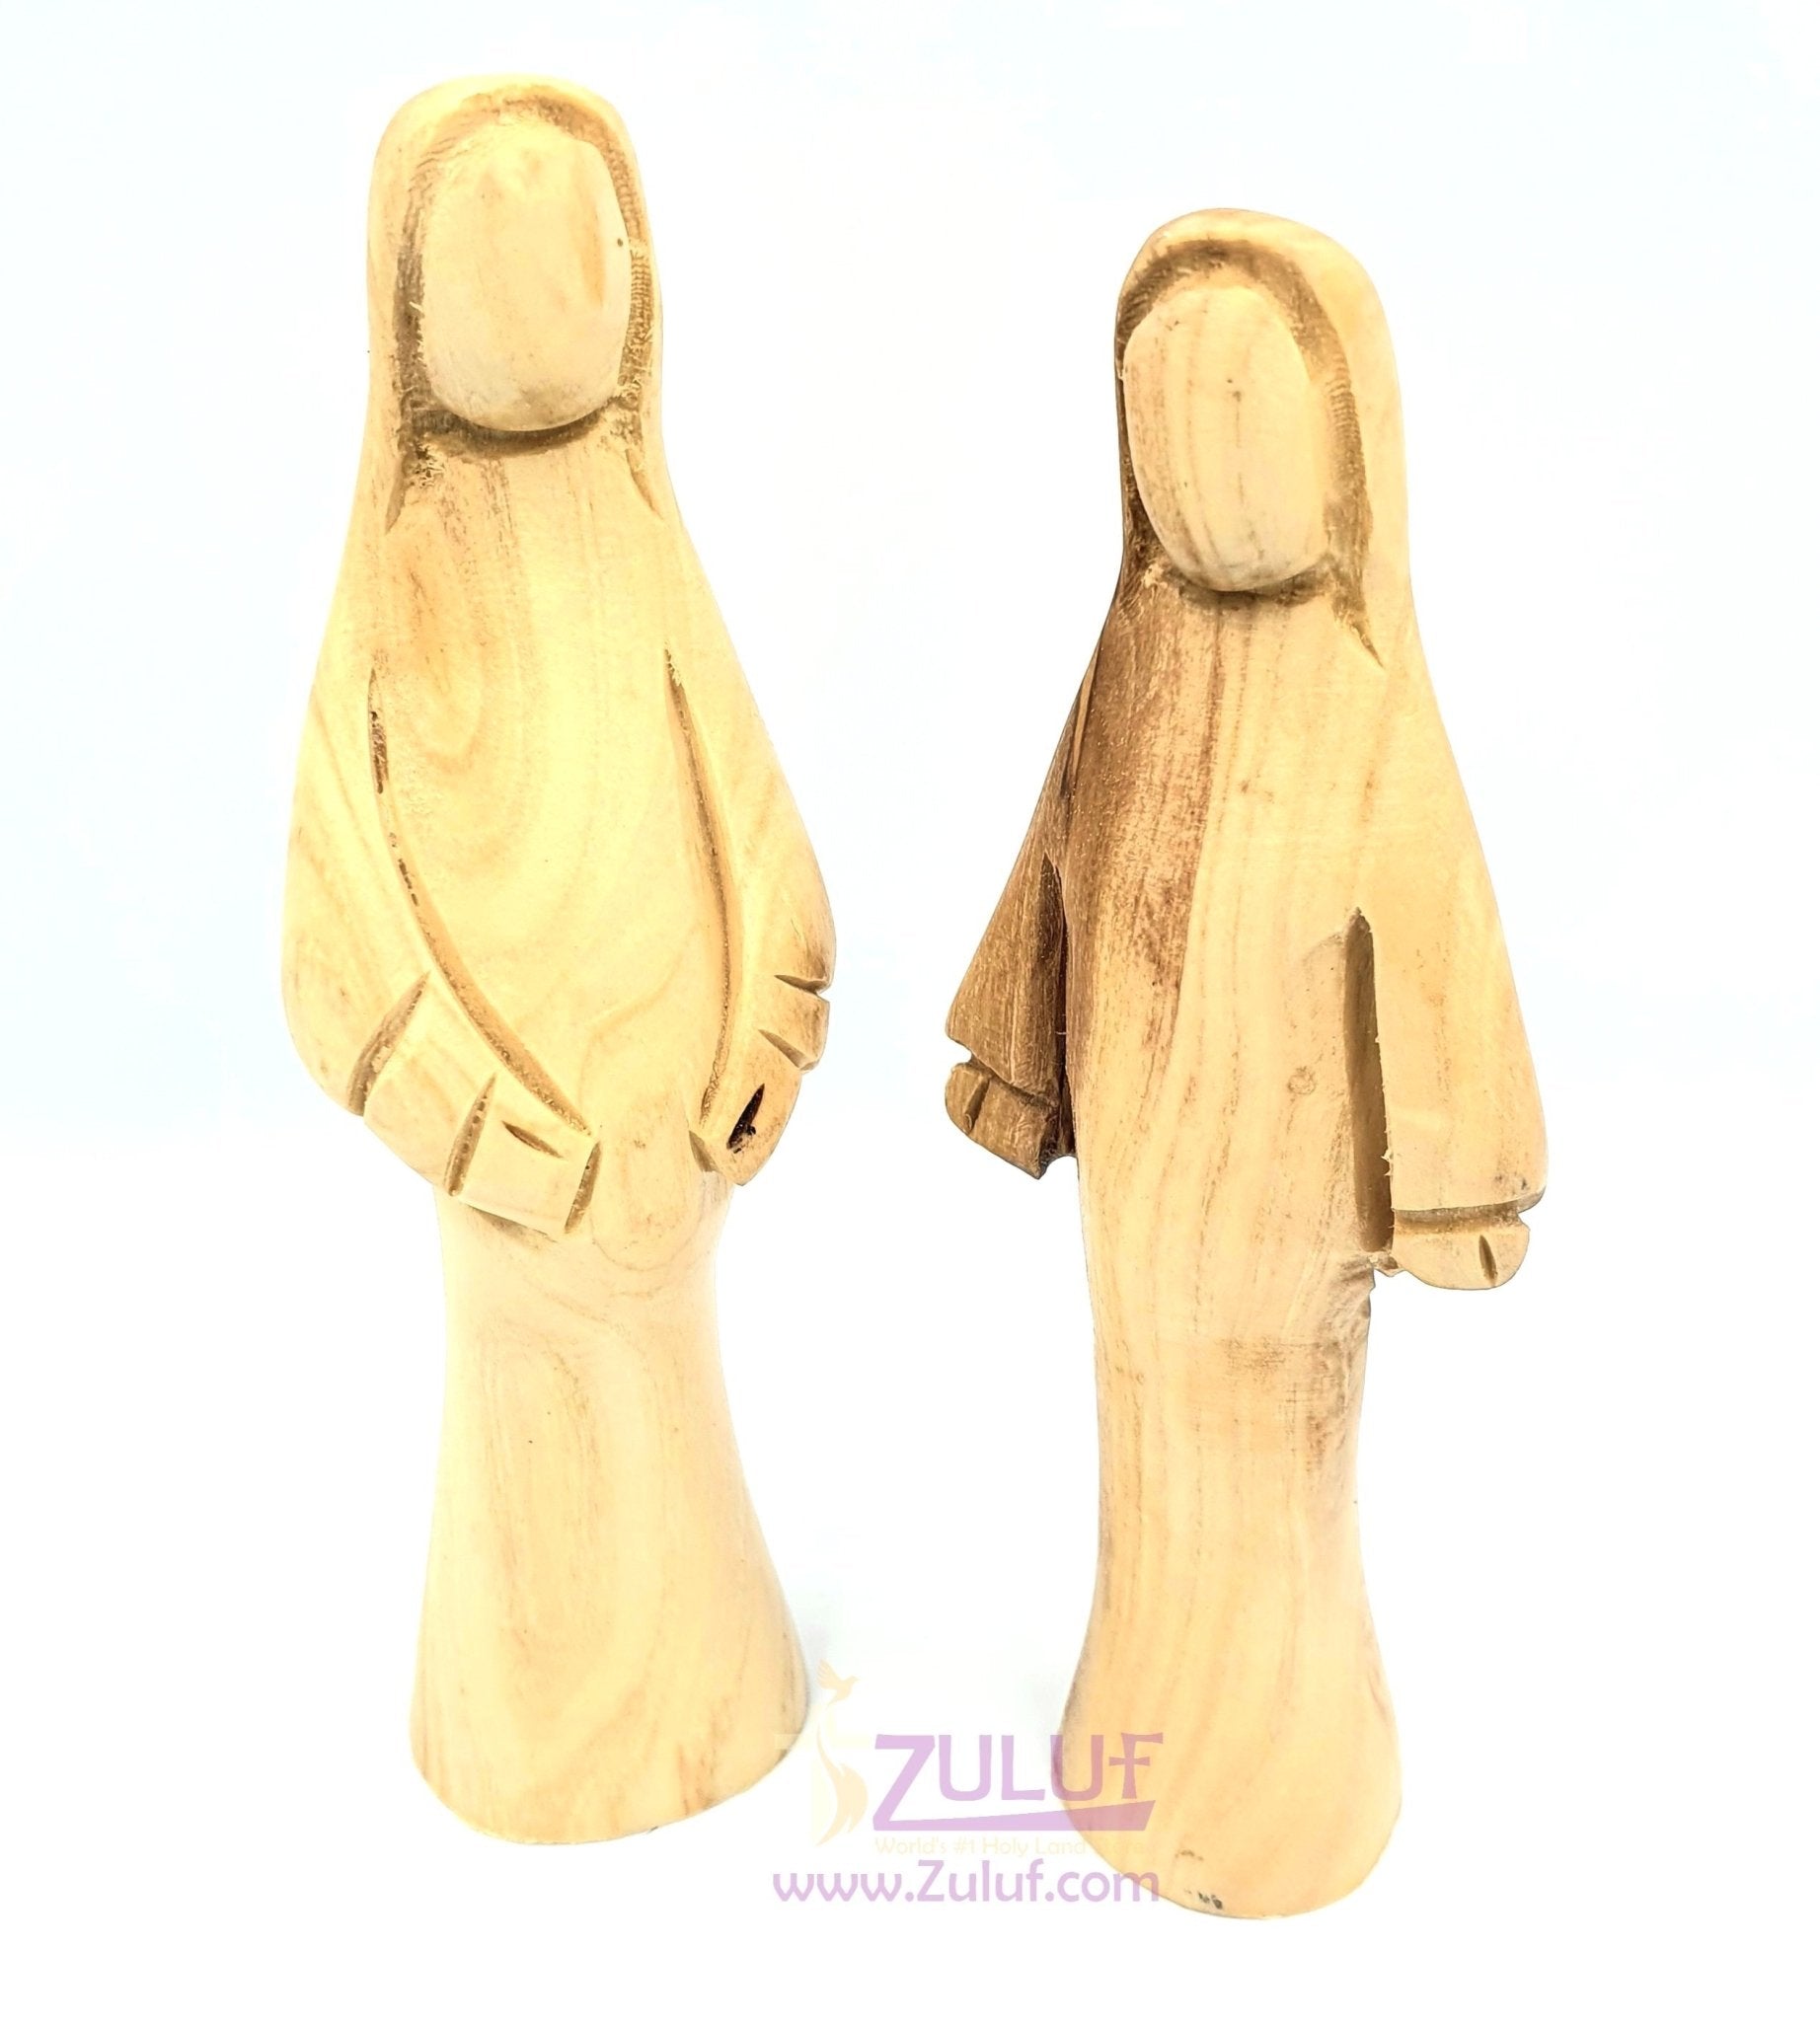 Mary and Elizabeth Olive Wood Statues Hand Made from Jerusalem 2 Pieces - MAR024 - Zuluf